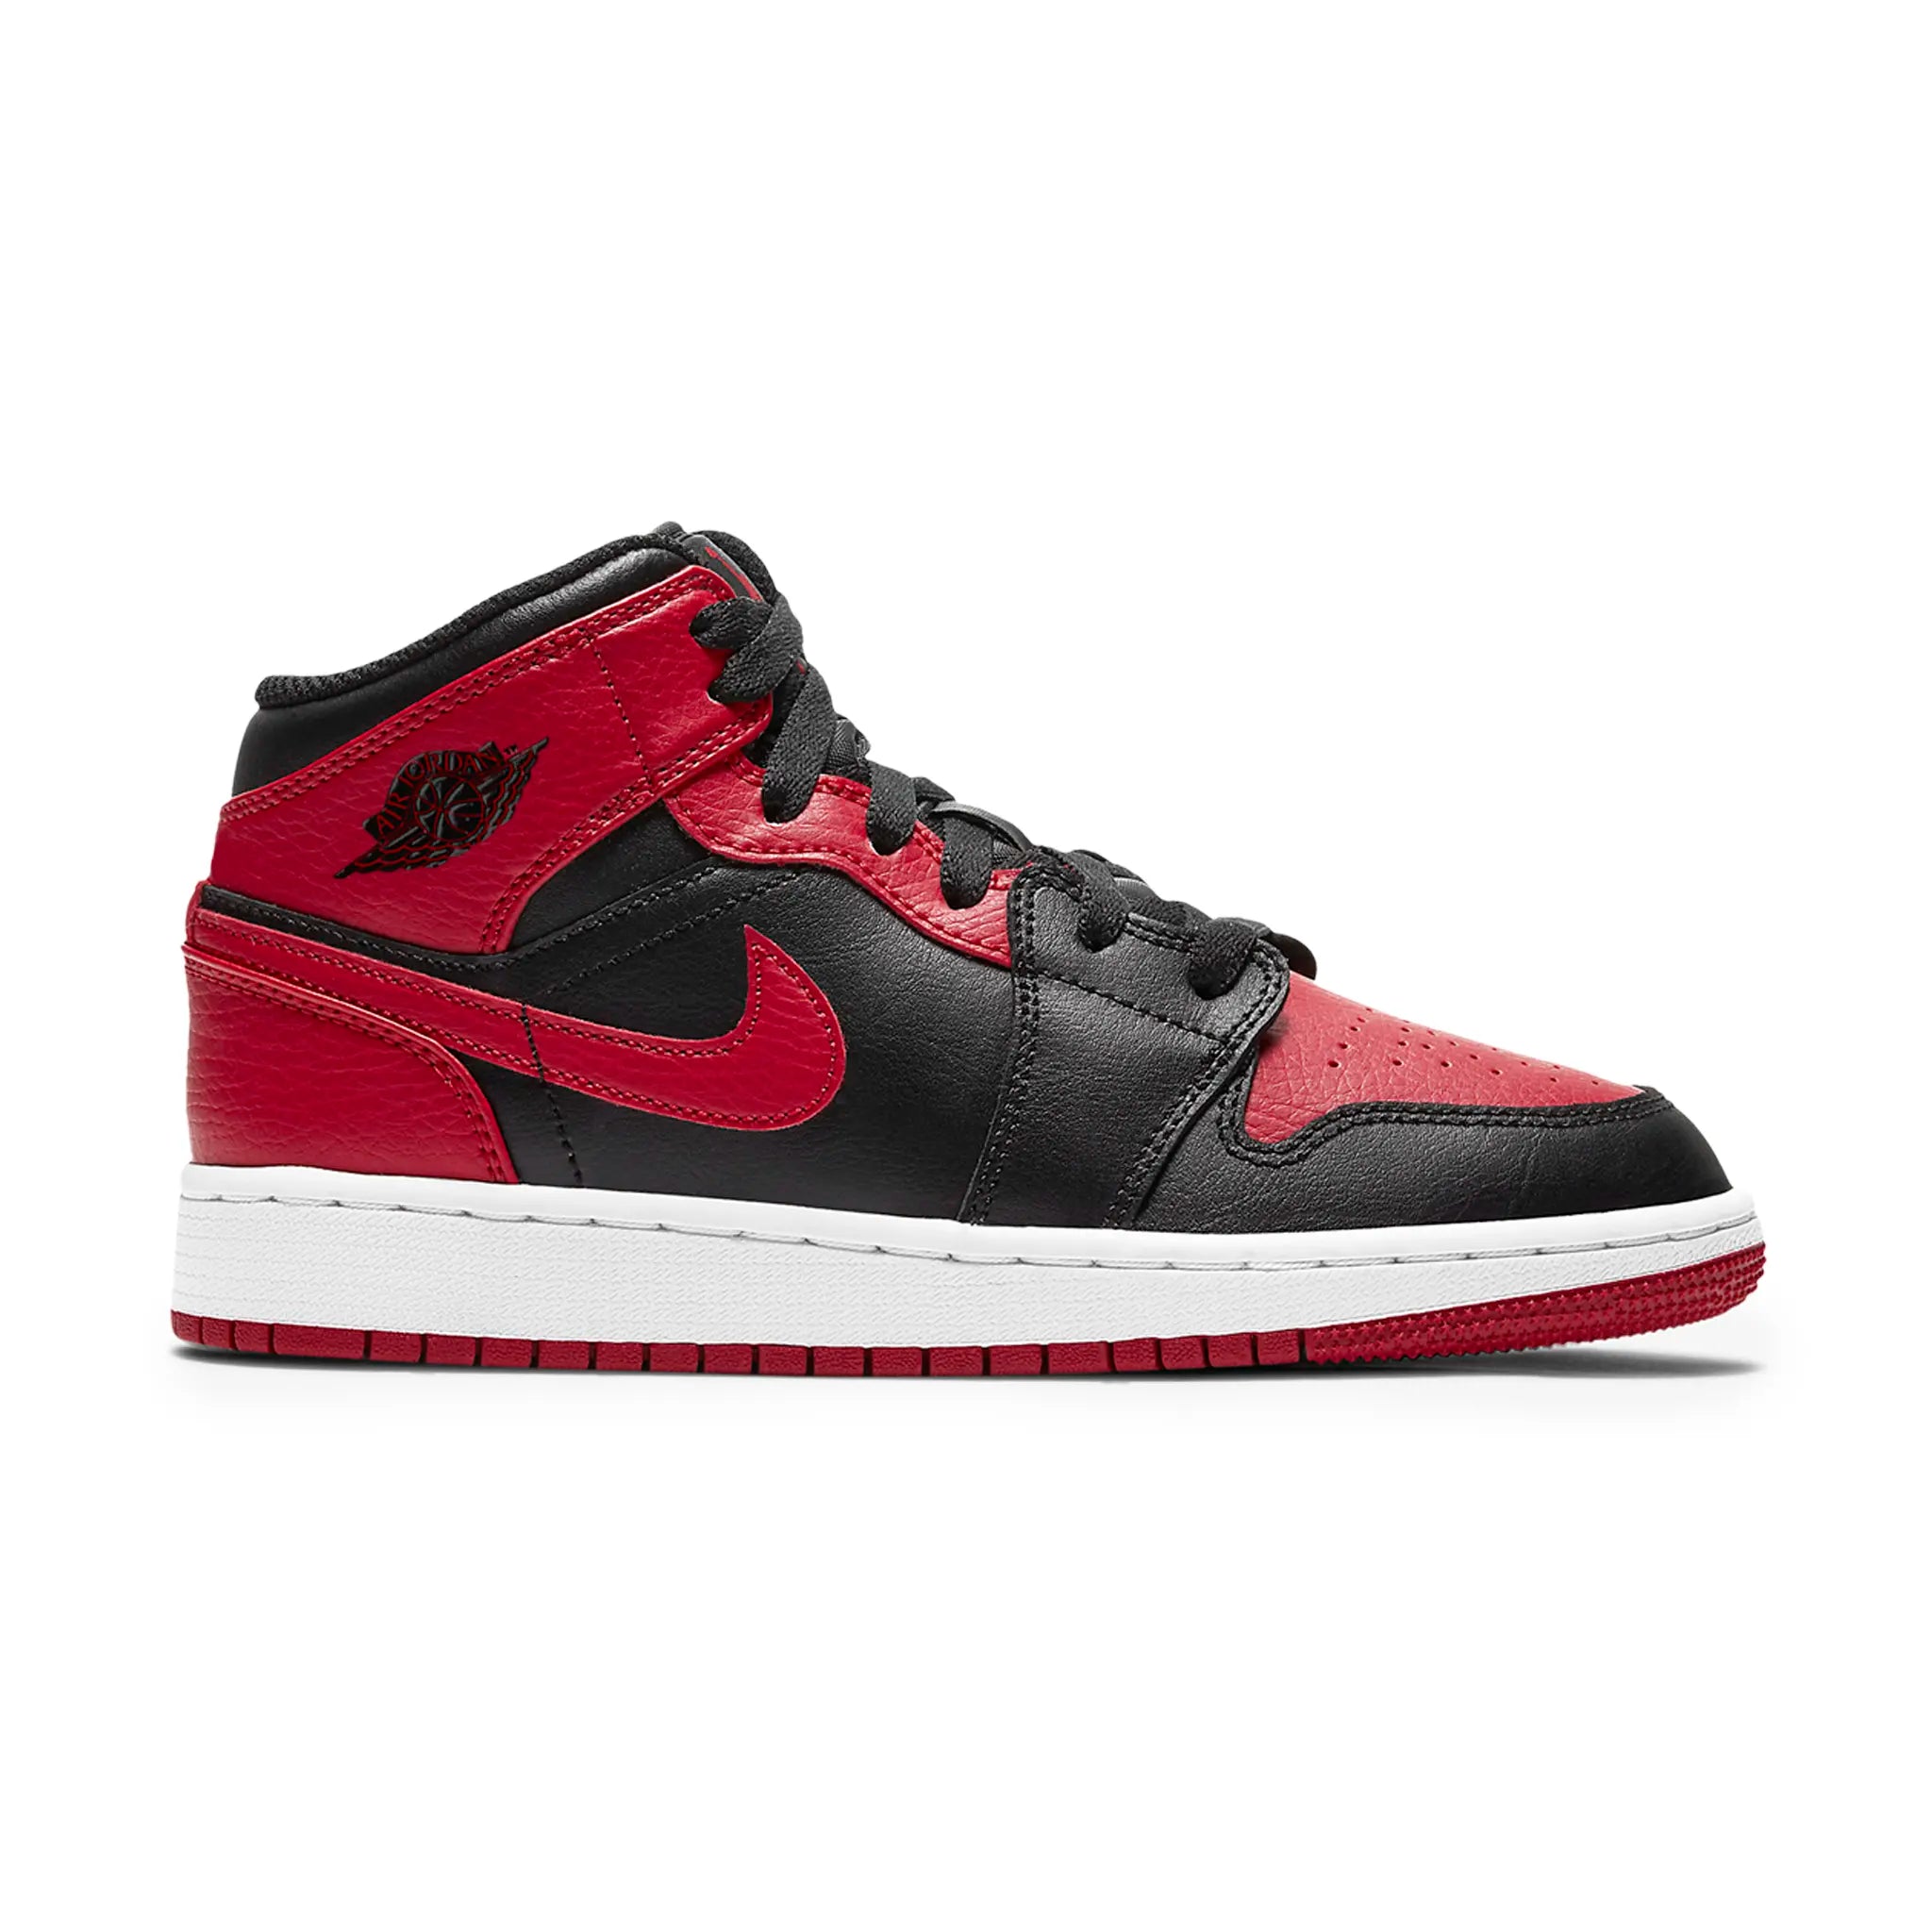 Side view of Air Jordan 1 Mid Banned (GS) 554725-074